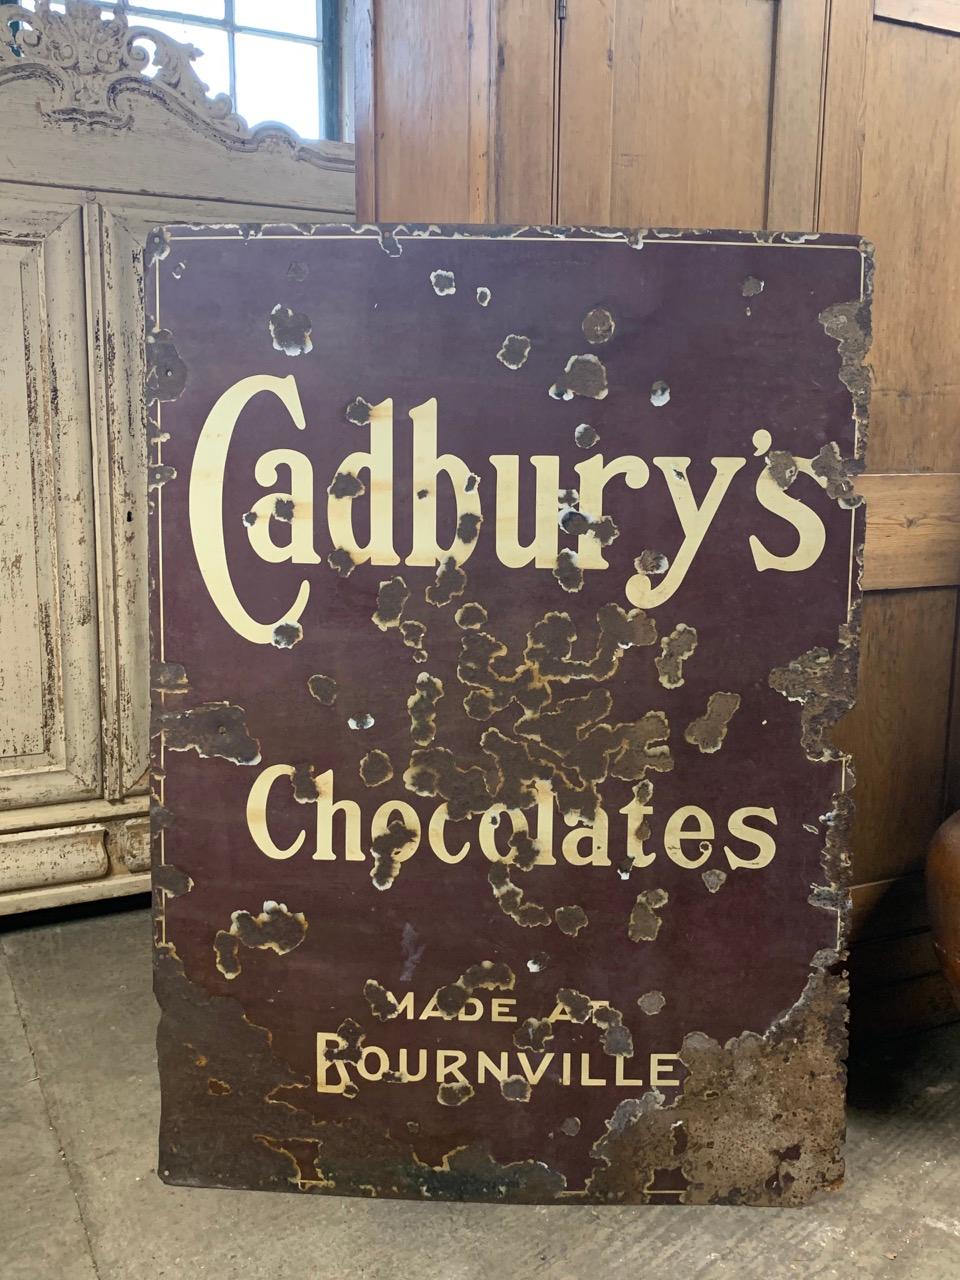 An original early 20th century enamelled sign advertising Cadbury's Chocolate Made At Bournville. Circa 1920's. In distressed condition but a good size and rare colour.